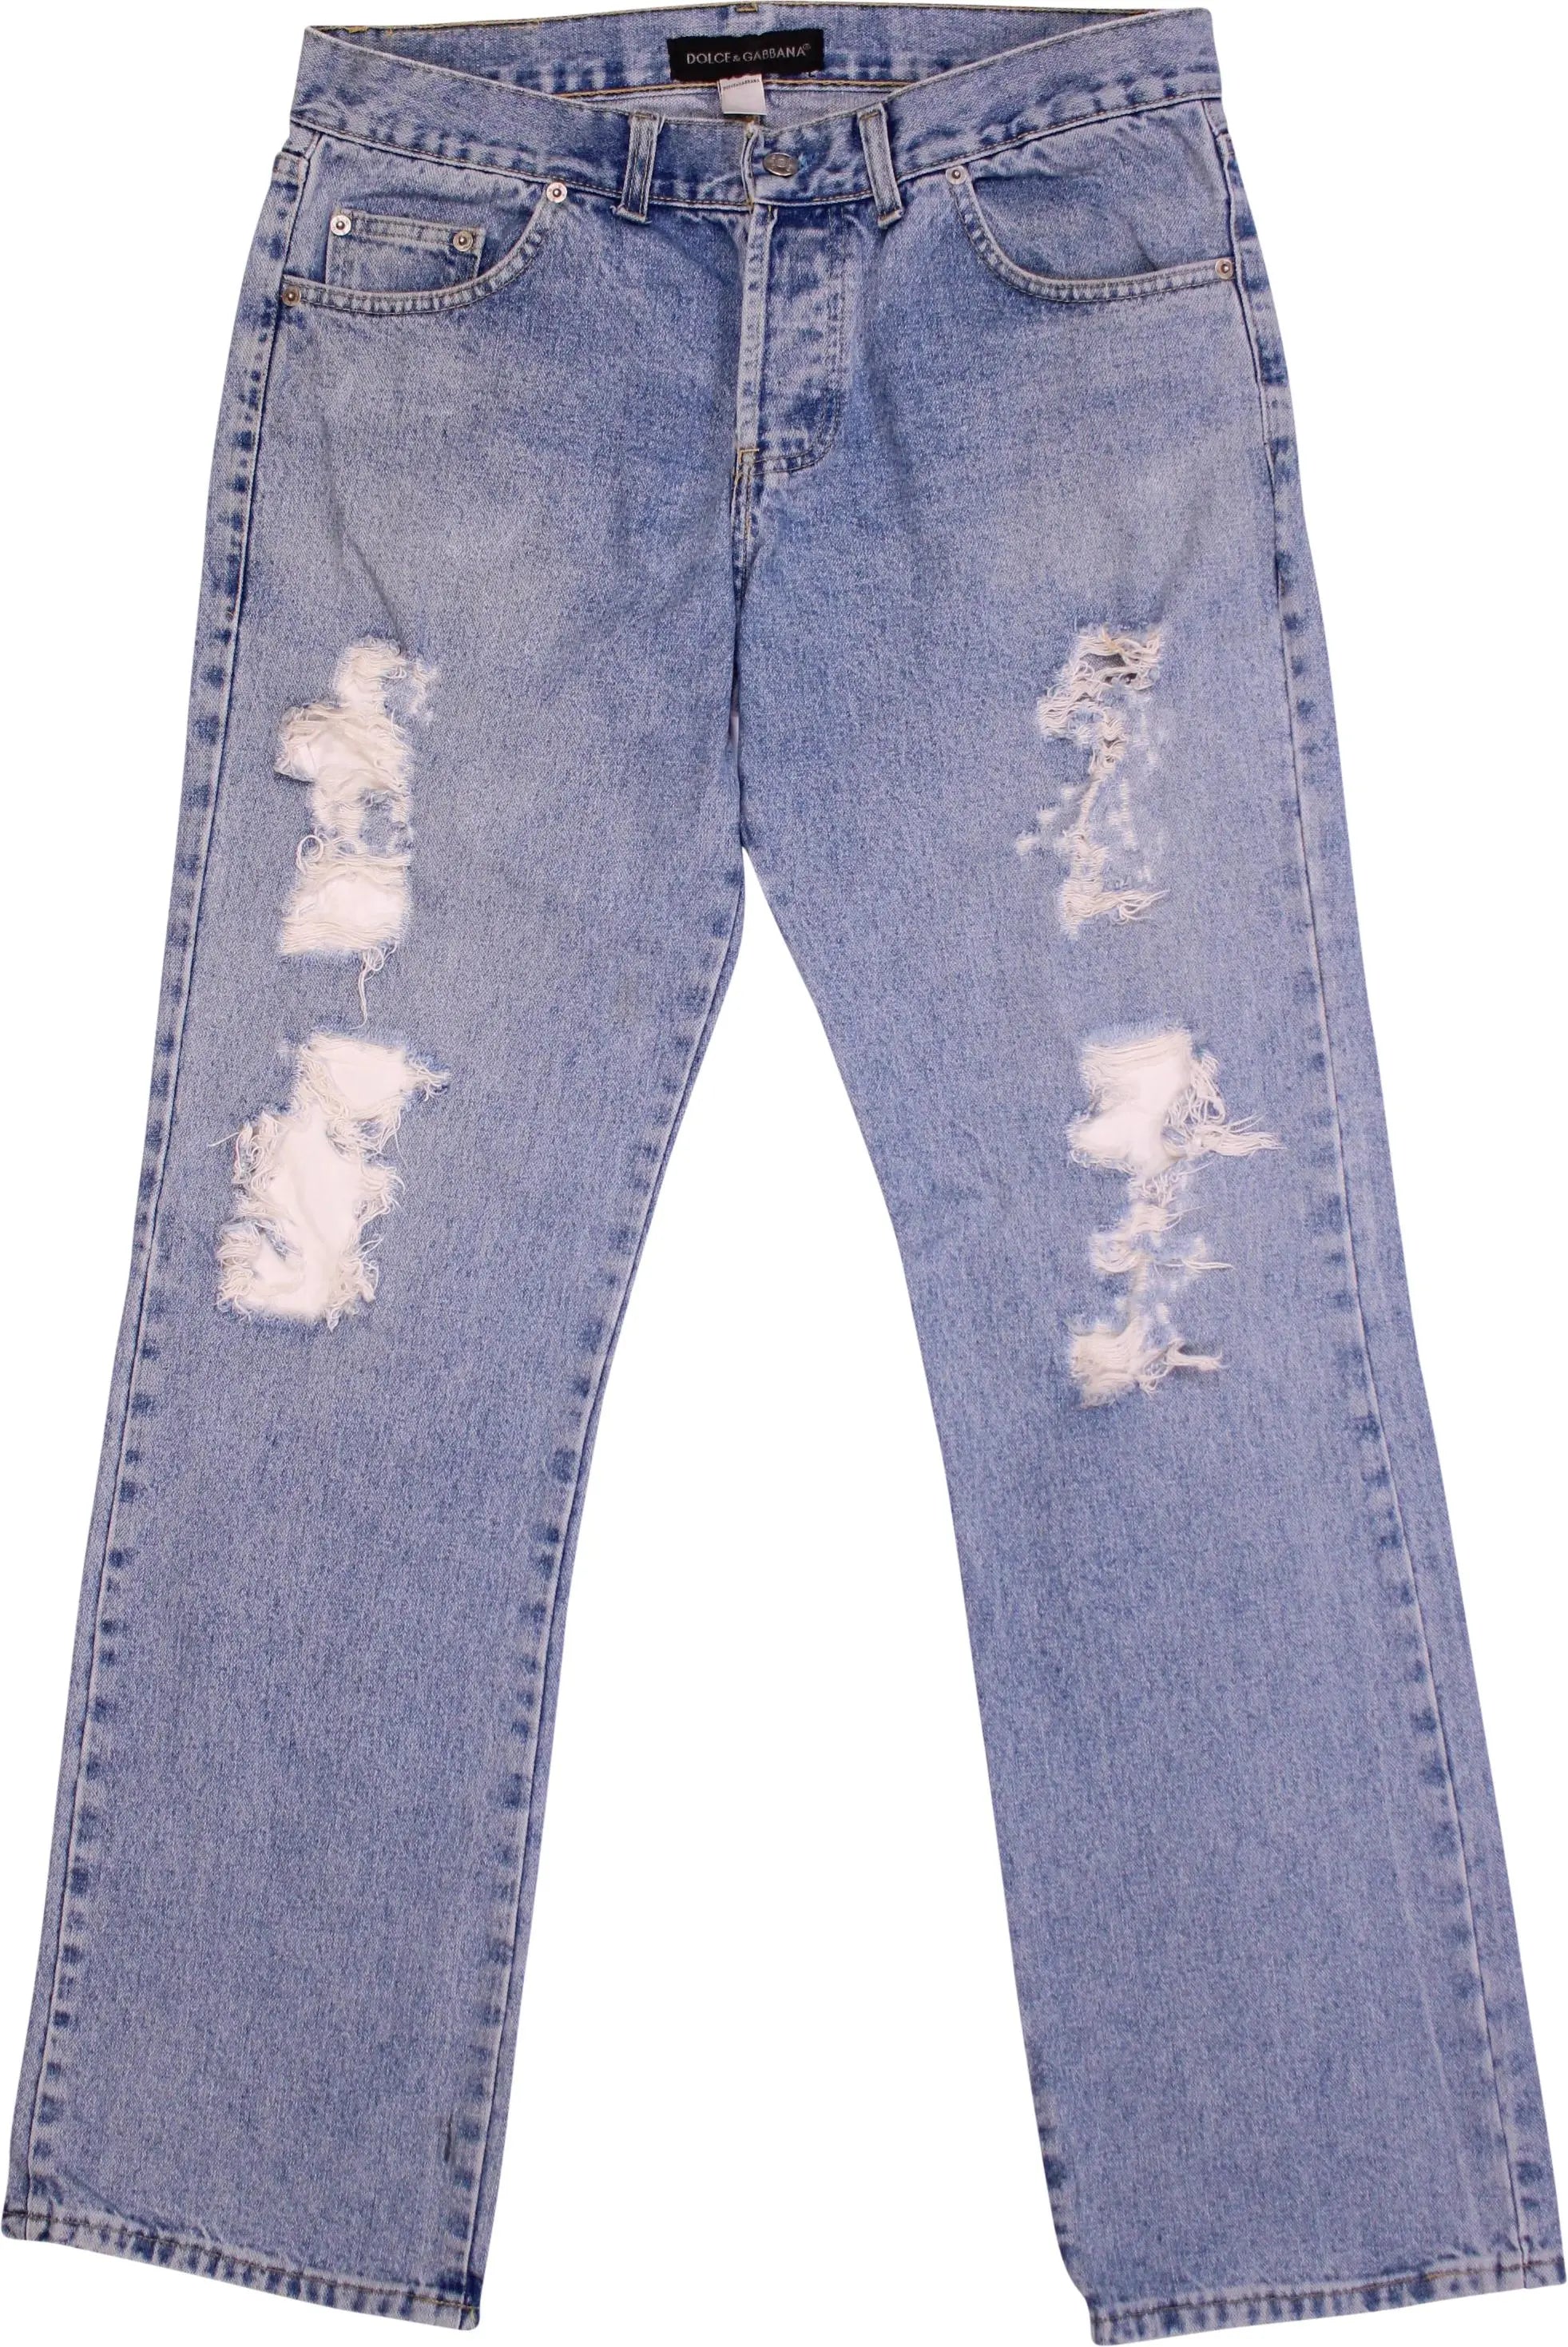 Dolce & Gabbana - Dolce & Gabbana Distressed Jeans- ThriftTale.com - Vintage and second handclothing